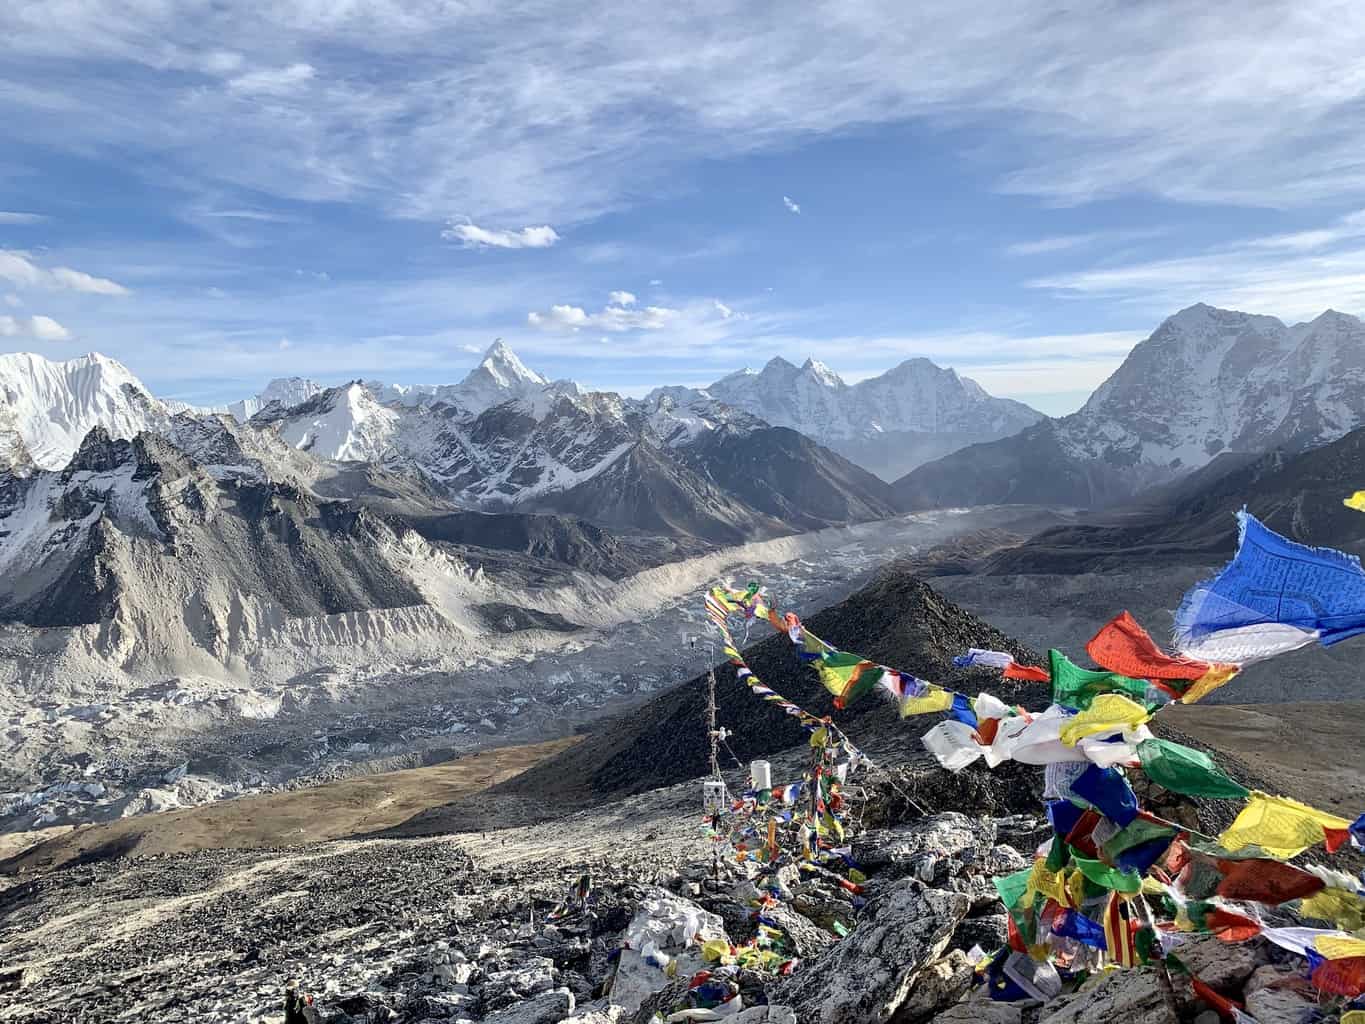 Everest Base Camp Trek Itinerary Blog | 11 Days in the Himalayas